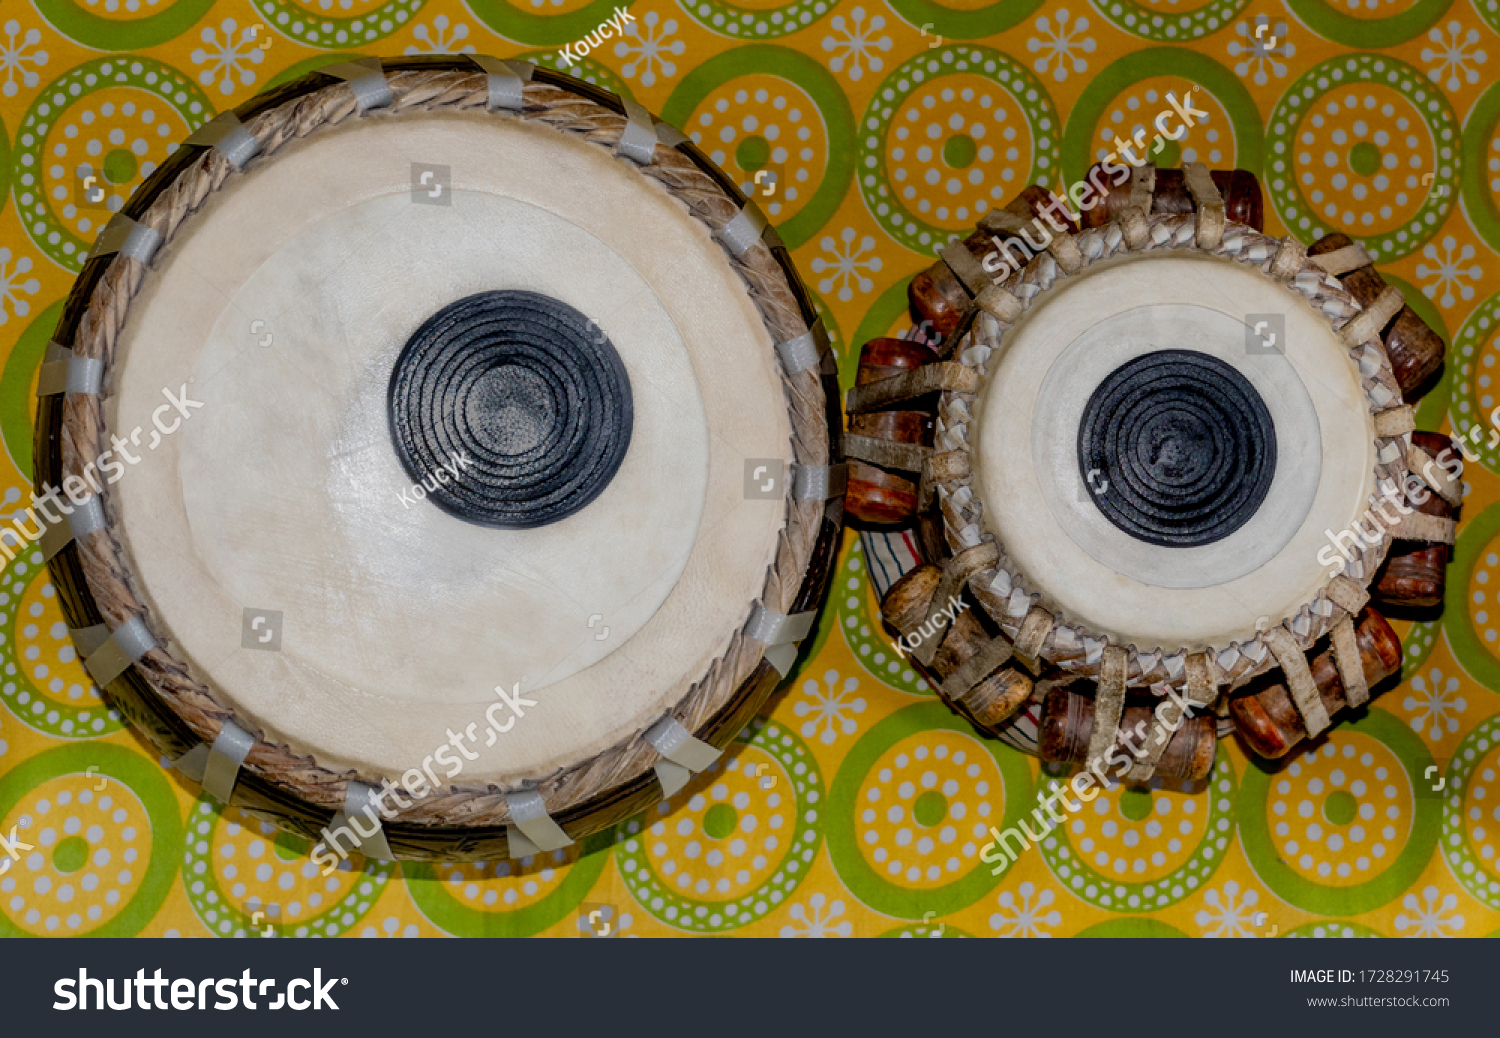 Top View Indian Classical Rhythmic Instrument Stock Photo 1728291745 ...